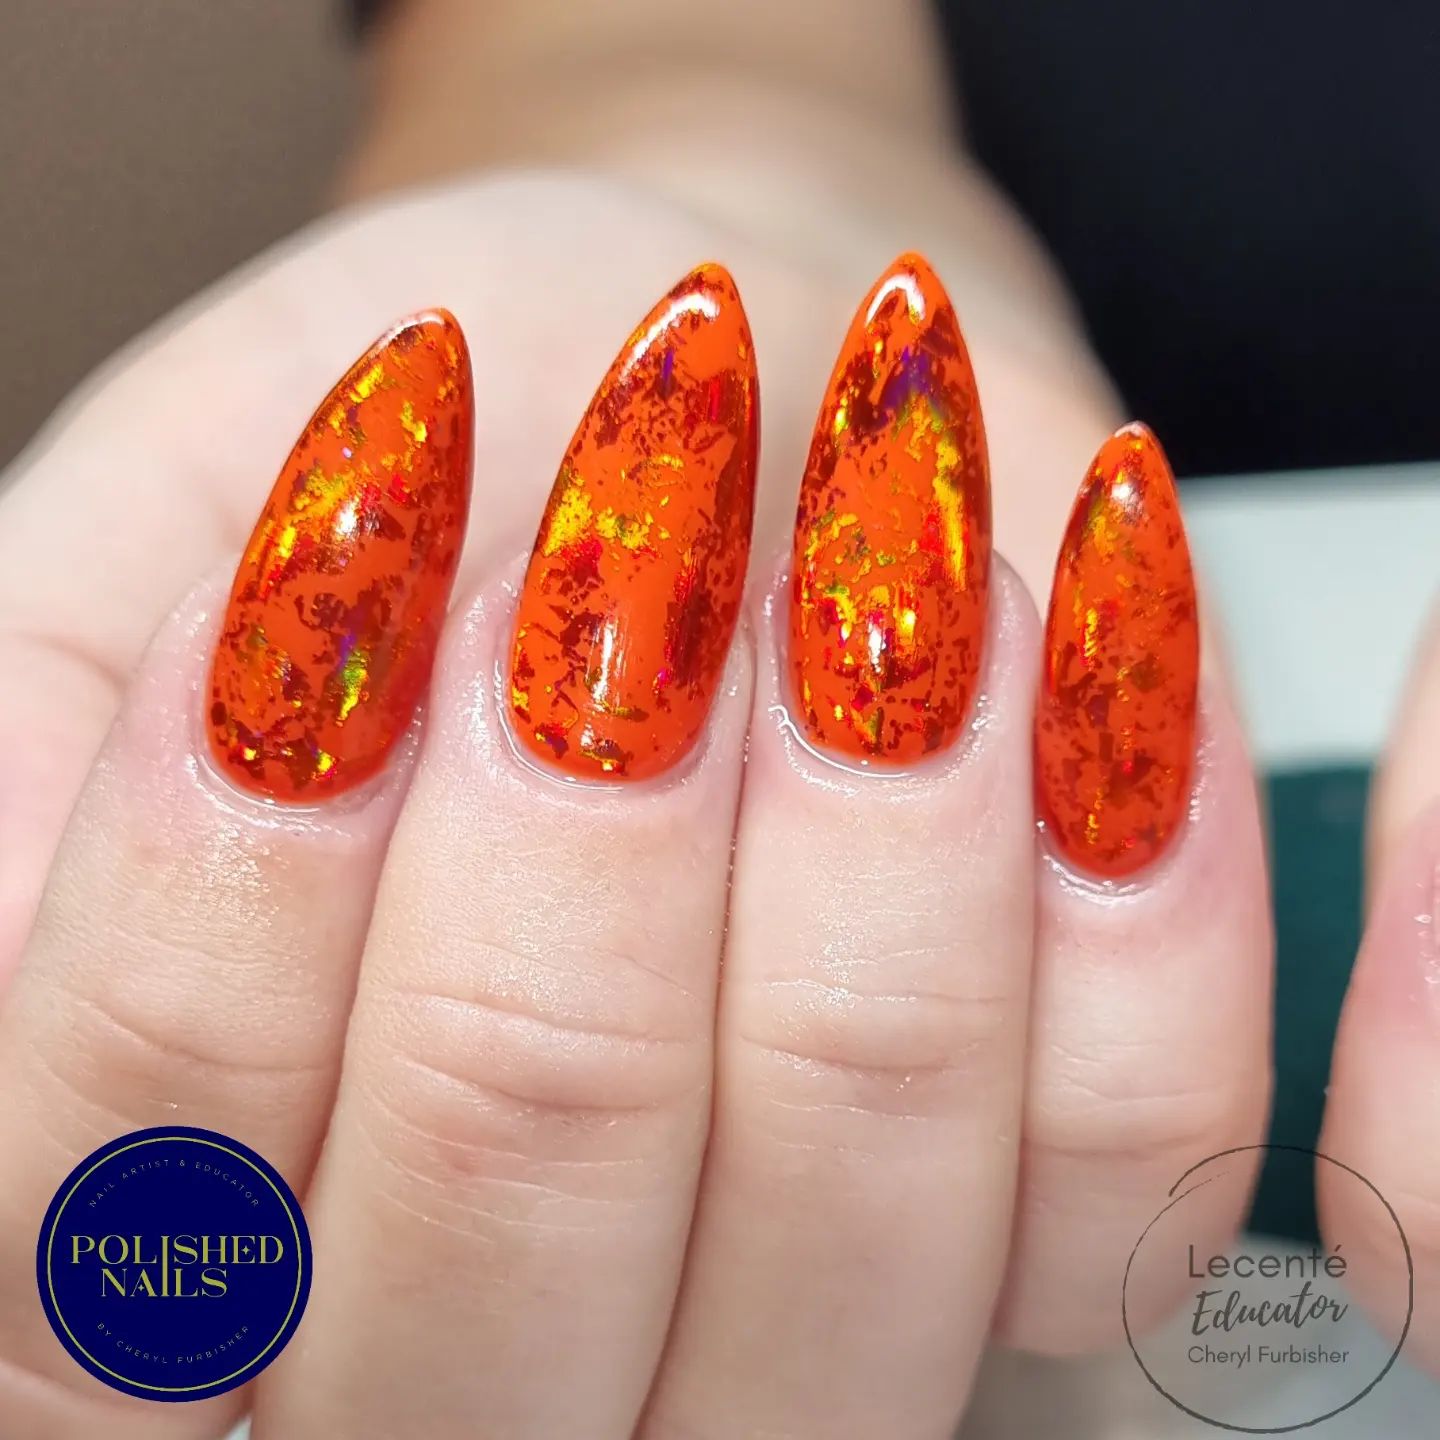 We love the way shiny orange nails look! It's a very daring look, but it would be great for a night out or for a party. What are you waiting for to shine out?